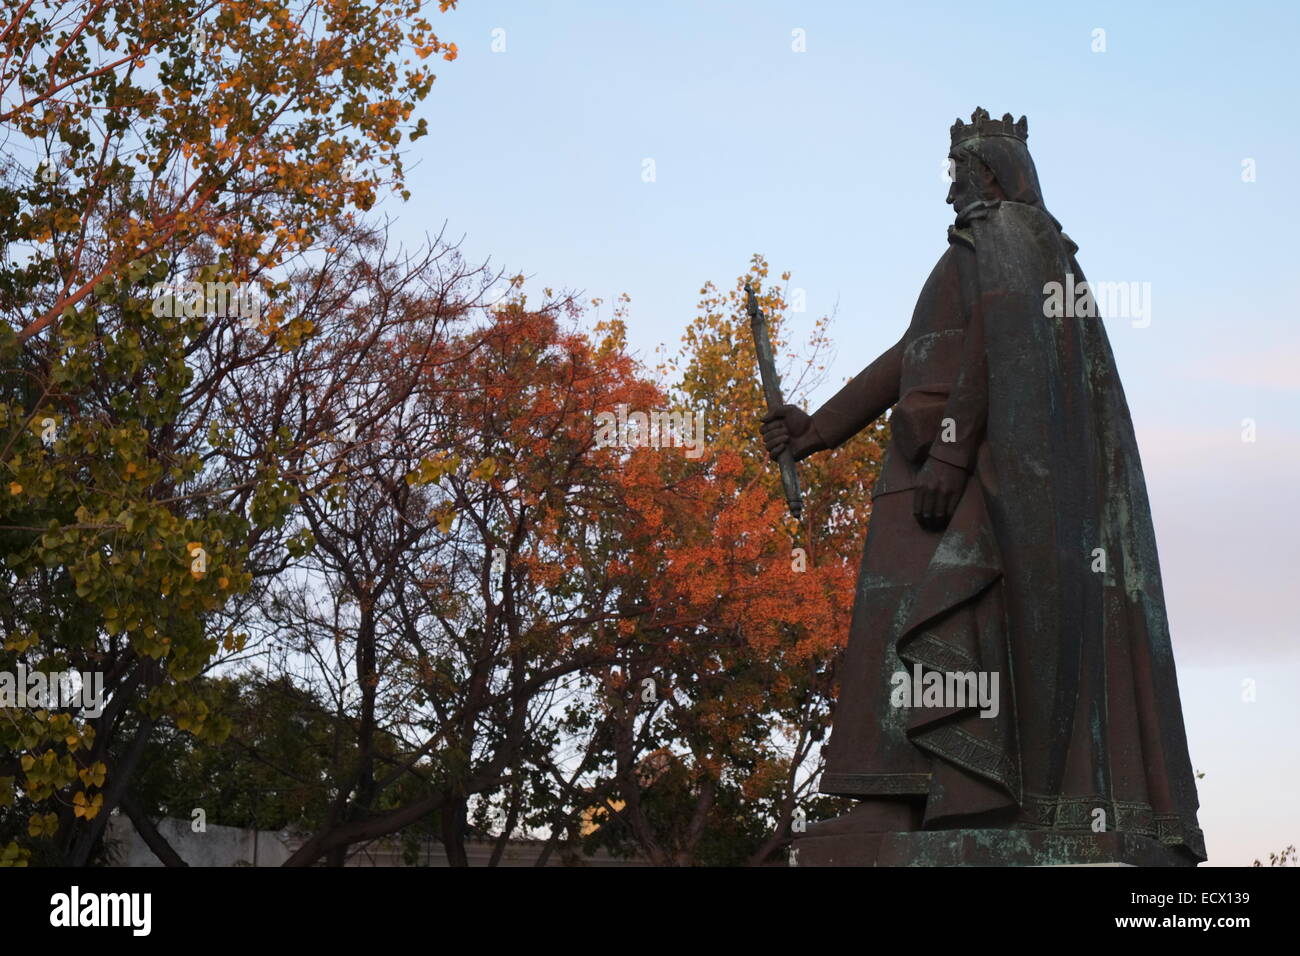 Statue of Infante Dom Henrique in Faro Old town during Autumn season Stock Photo